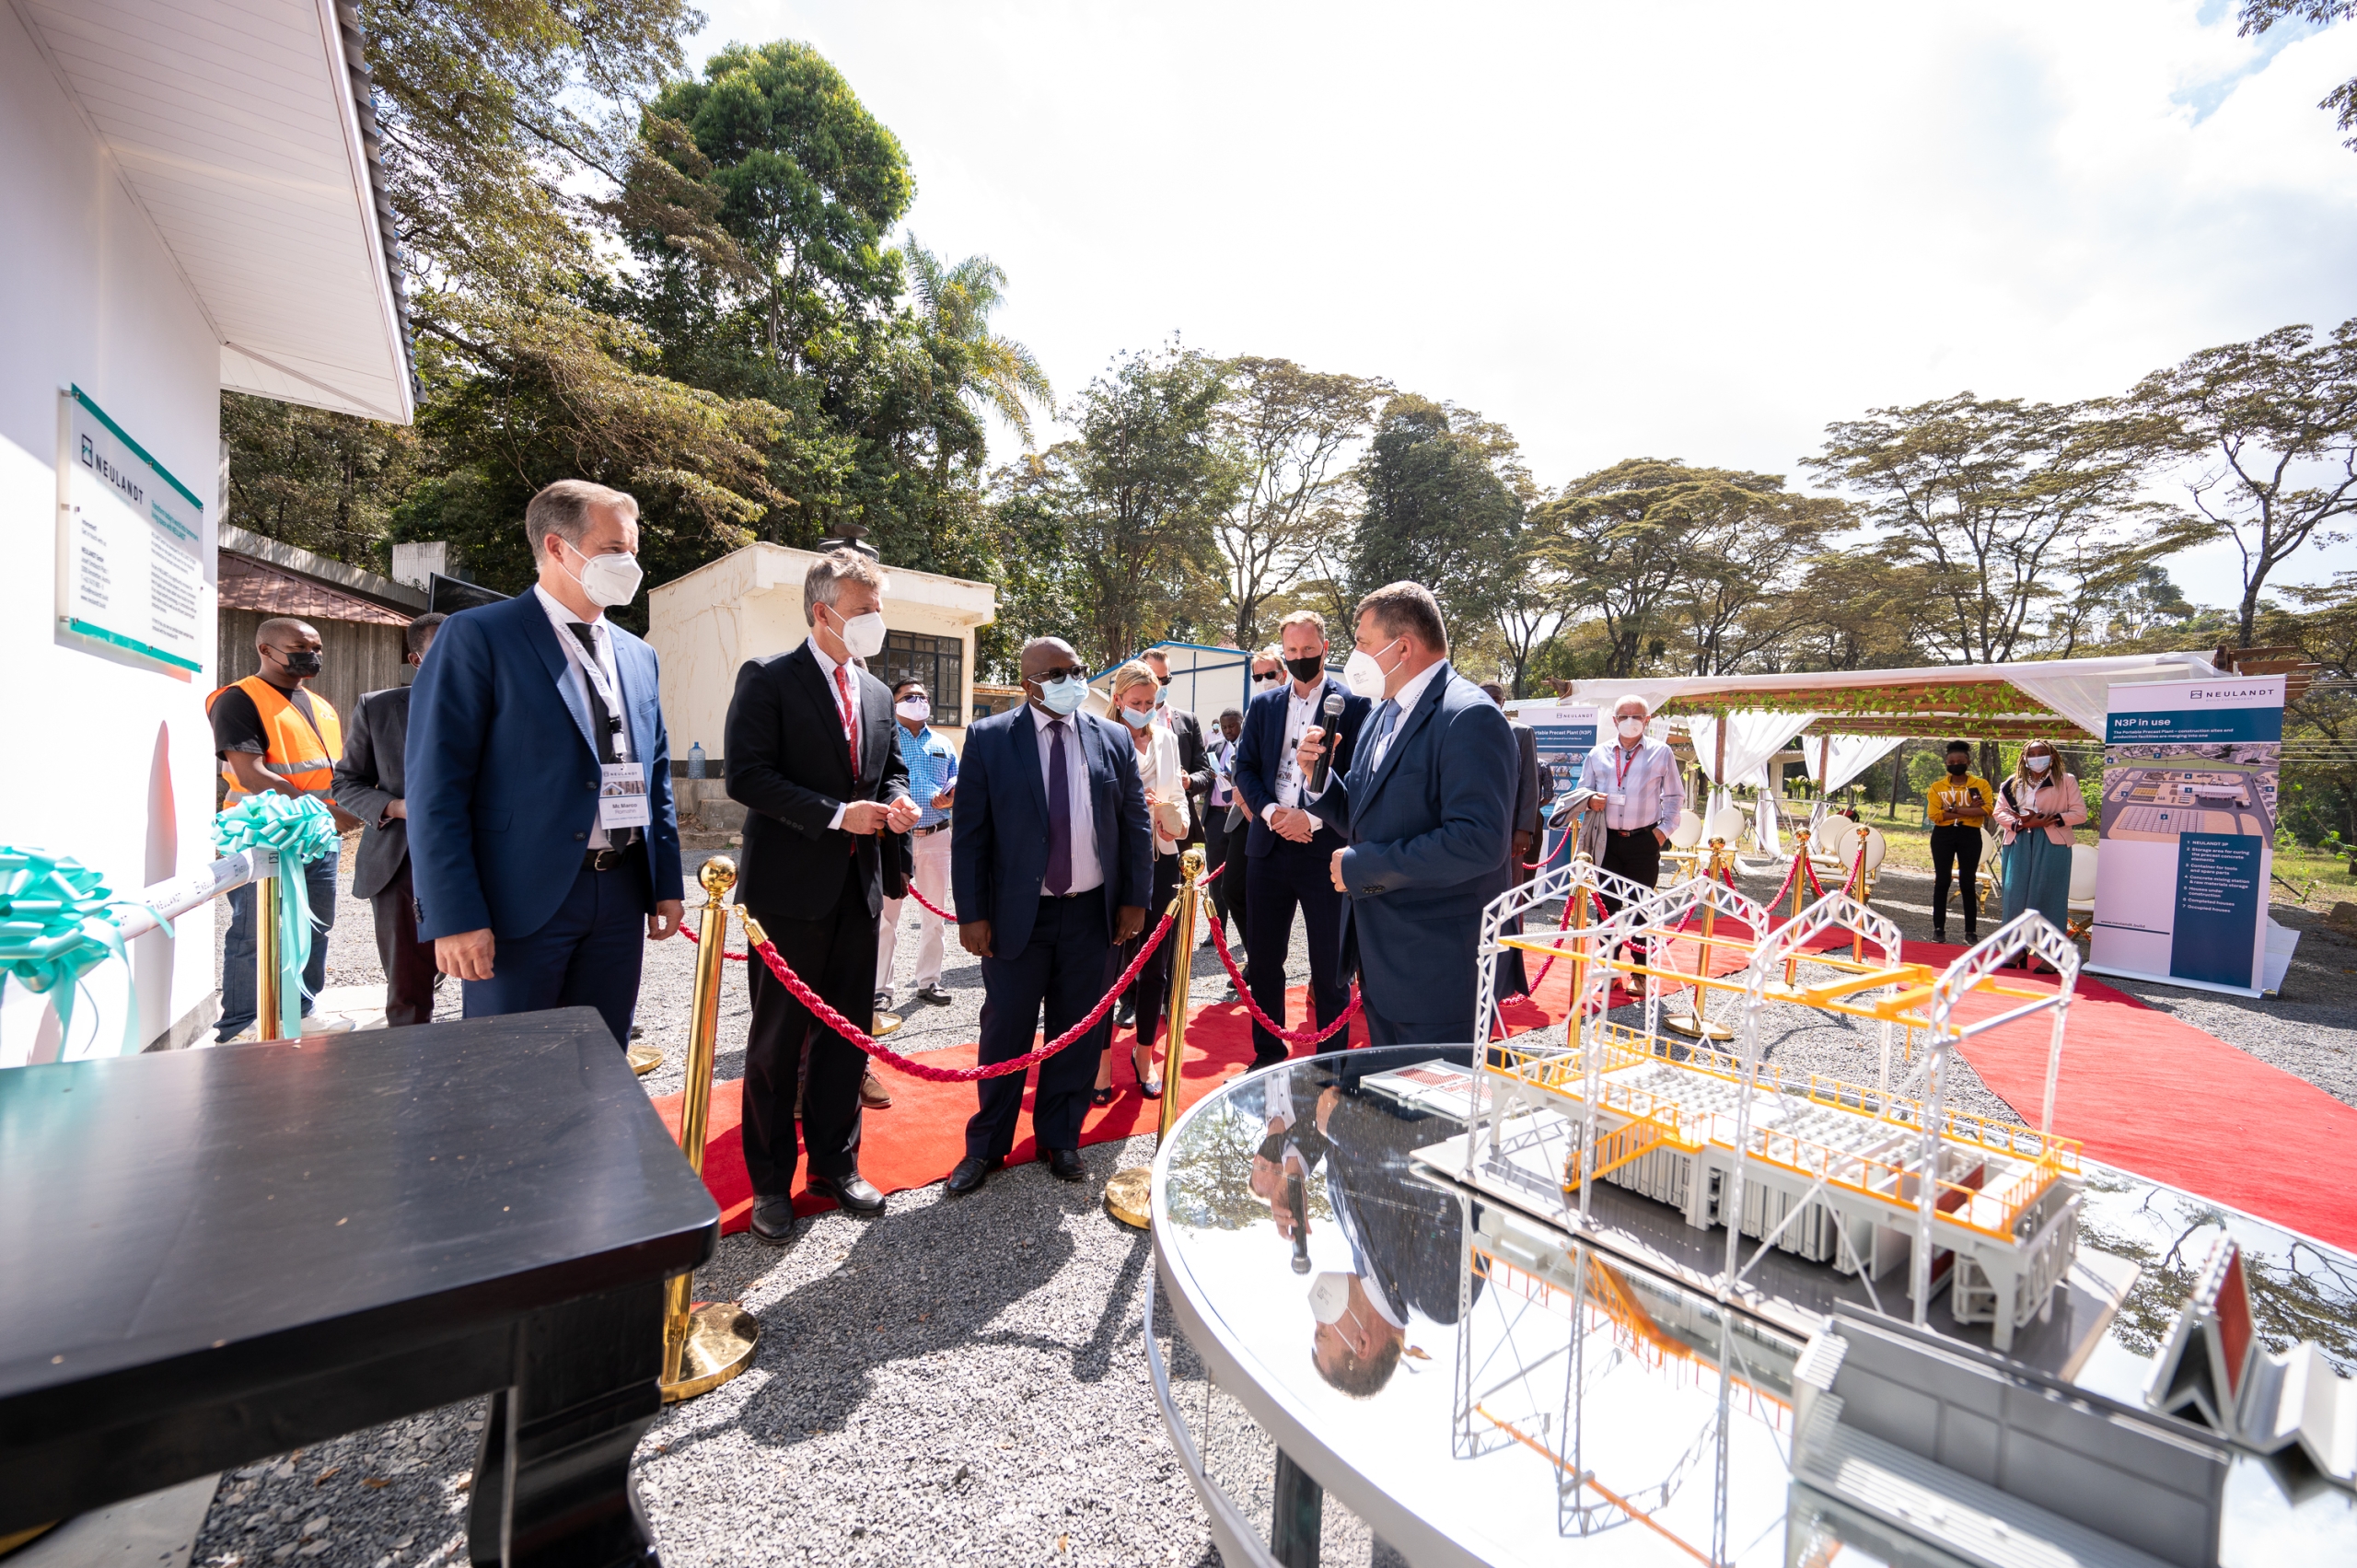 Businessman is giving a speech to a crowd of people in front of a model of the N3P precast plant and the show house at the NCA show ground in Kenia